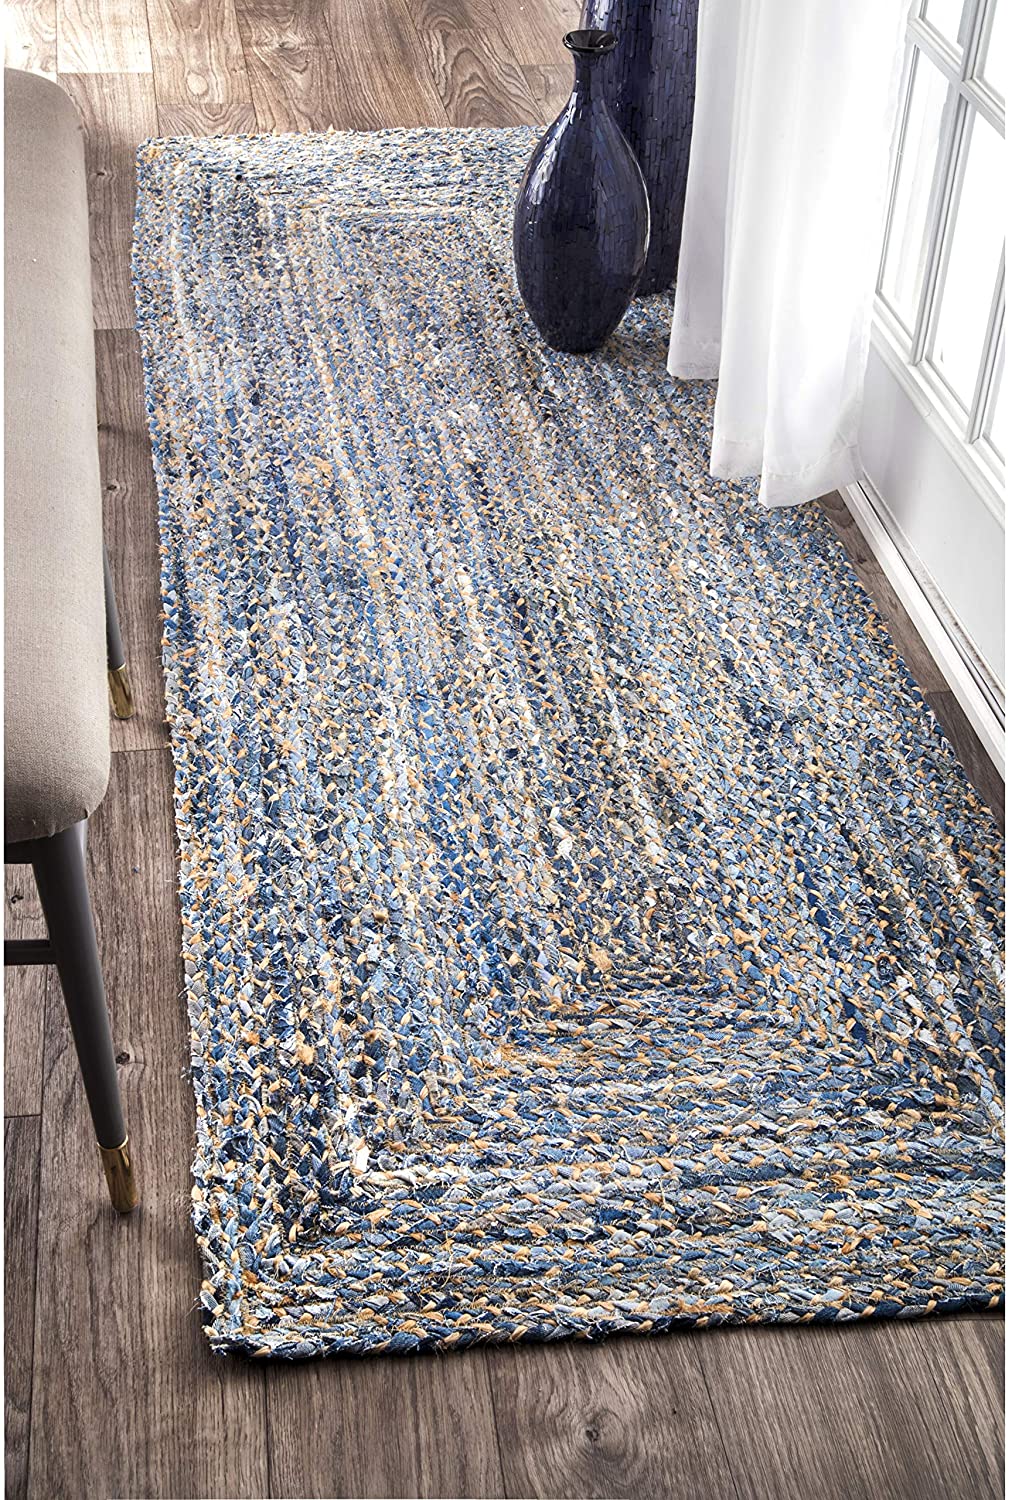 Photo 1 of nuLOOM Dune Road Hand Braided Denim and Jute Interwoven Solid Rug Cotton 2 6 x 6